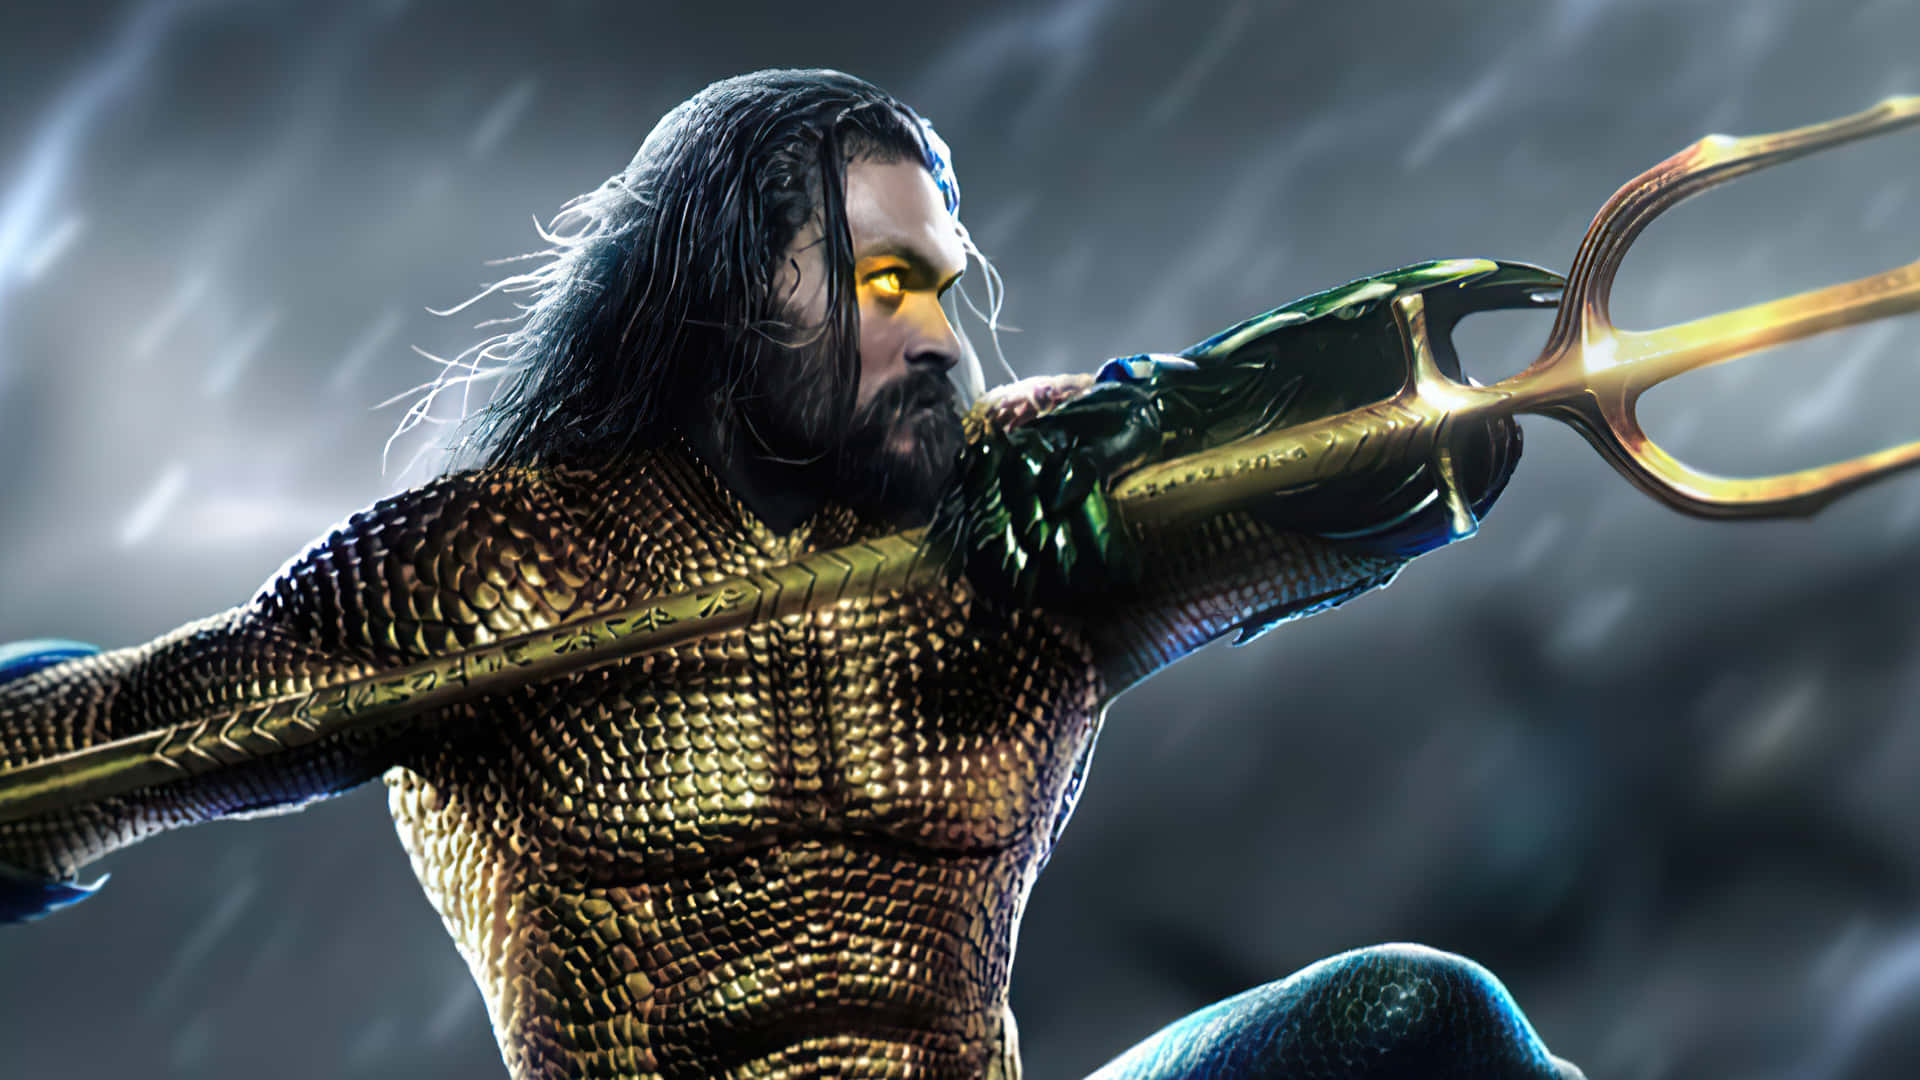 Join Aquaman on an Epic Underwater Adventure